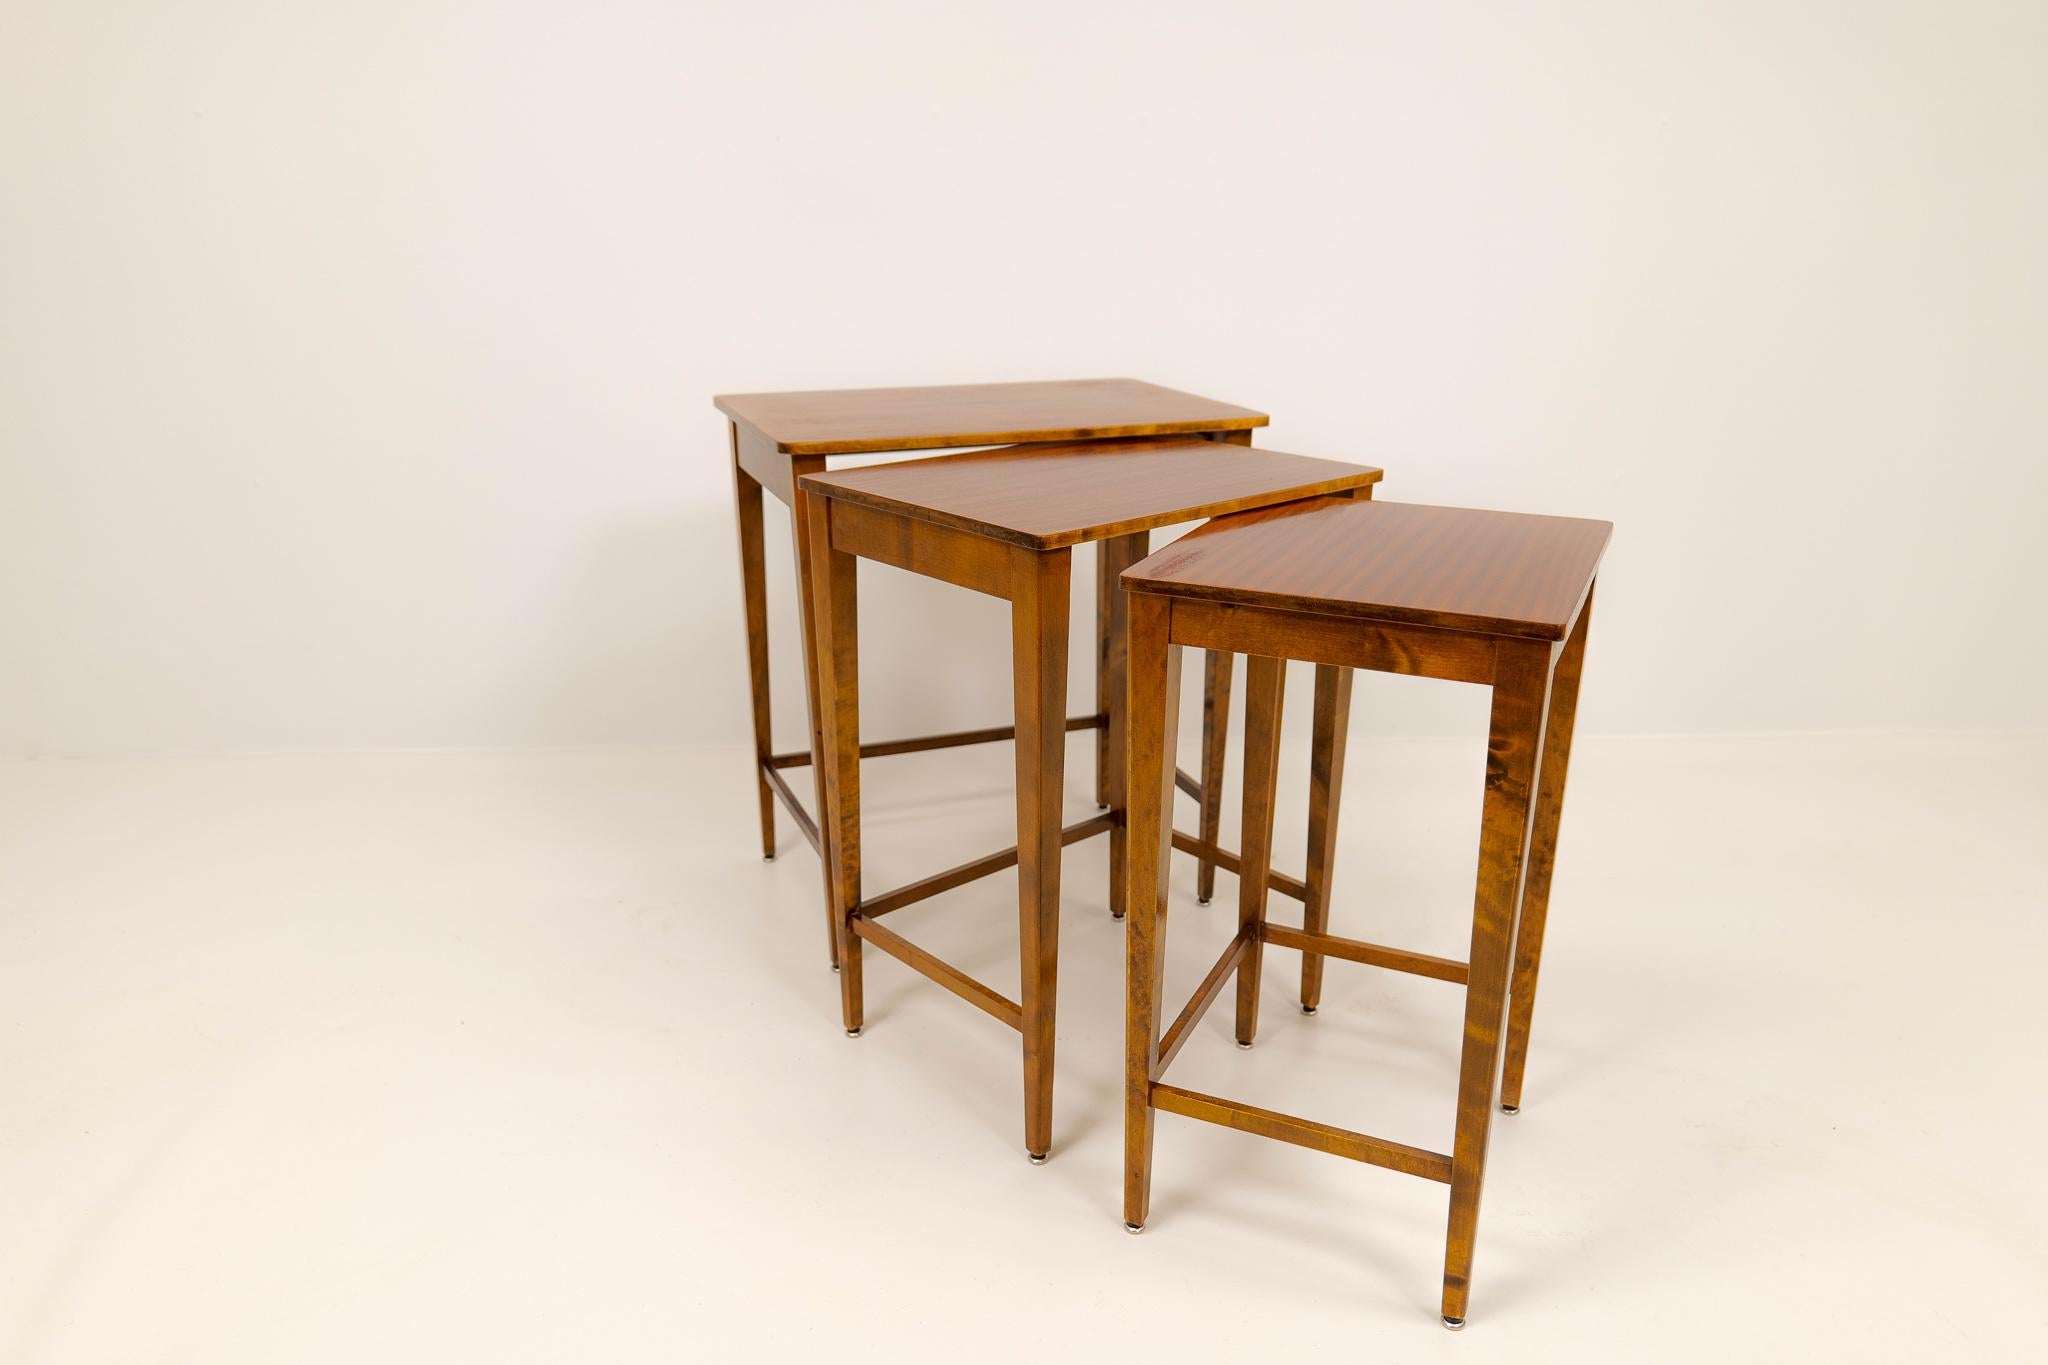 Art Deco Nesting Tables Mahogany and Stained Birch, NK Sweden, 1940s For Sale 5